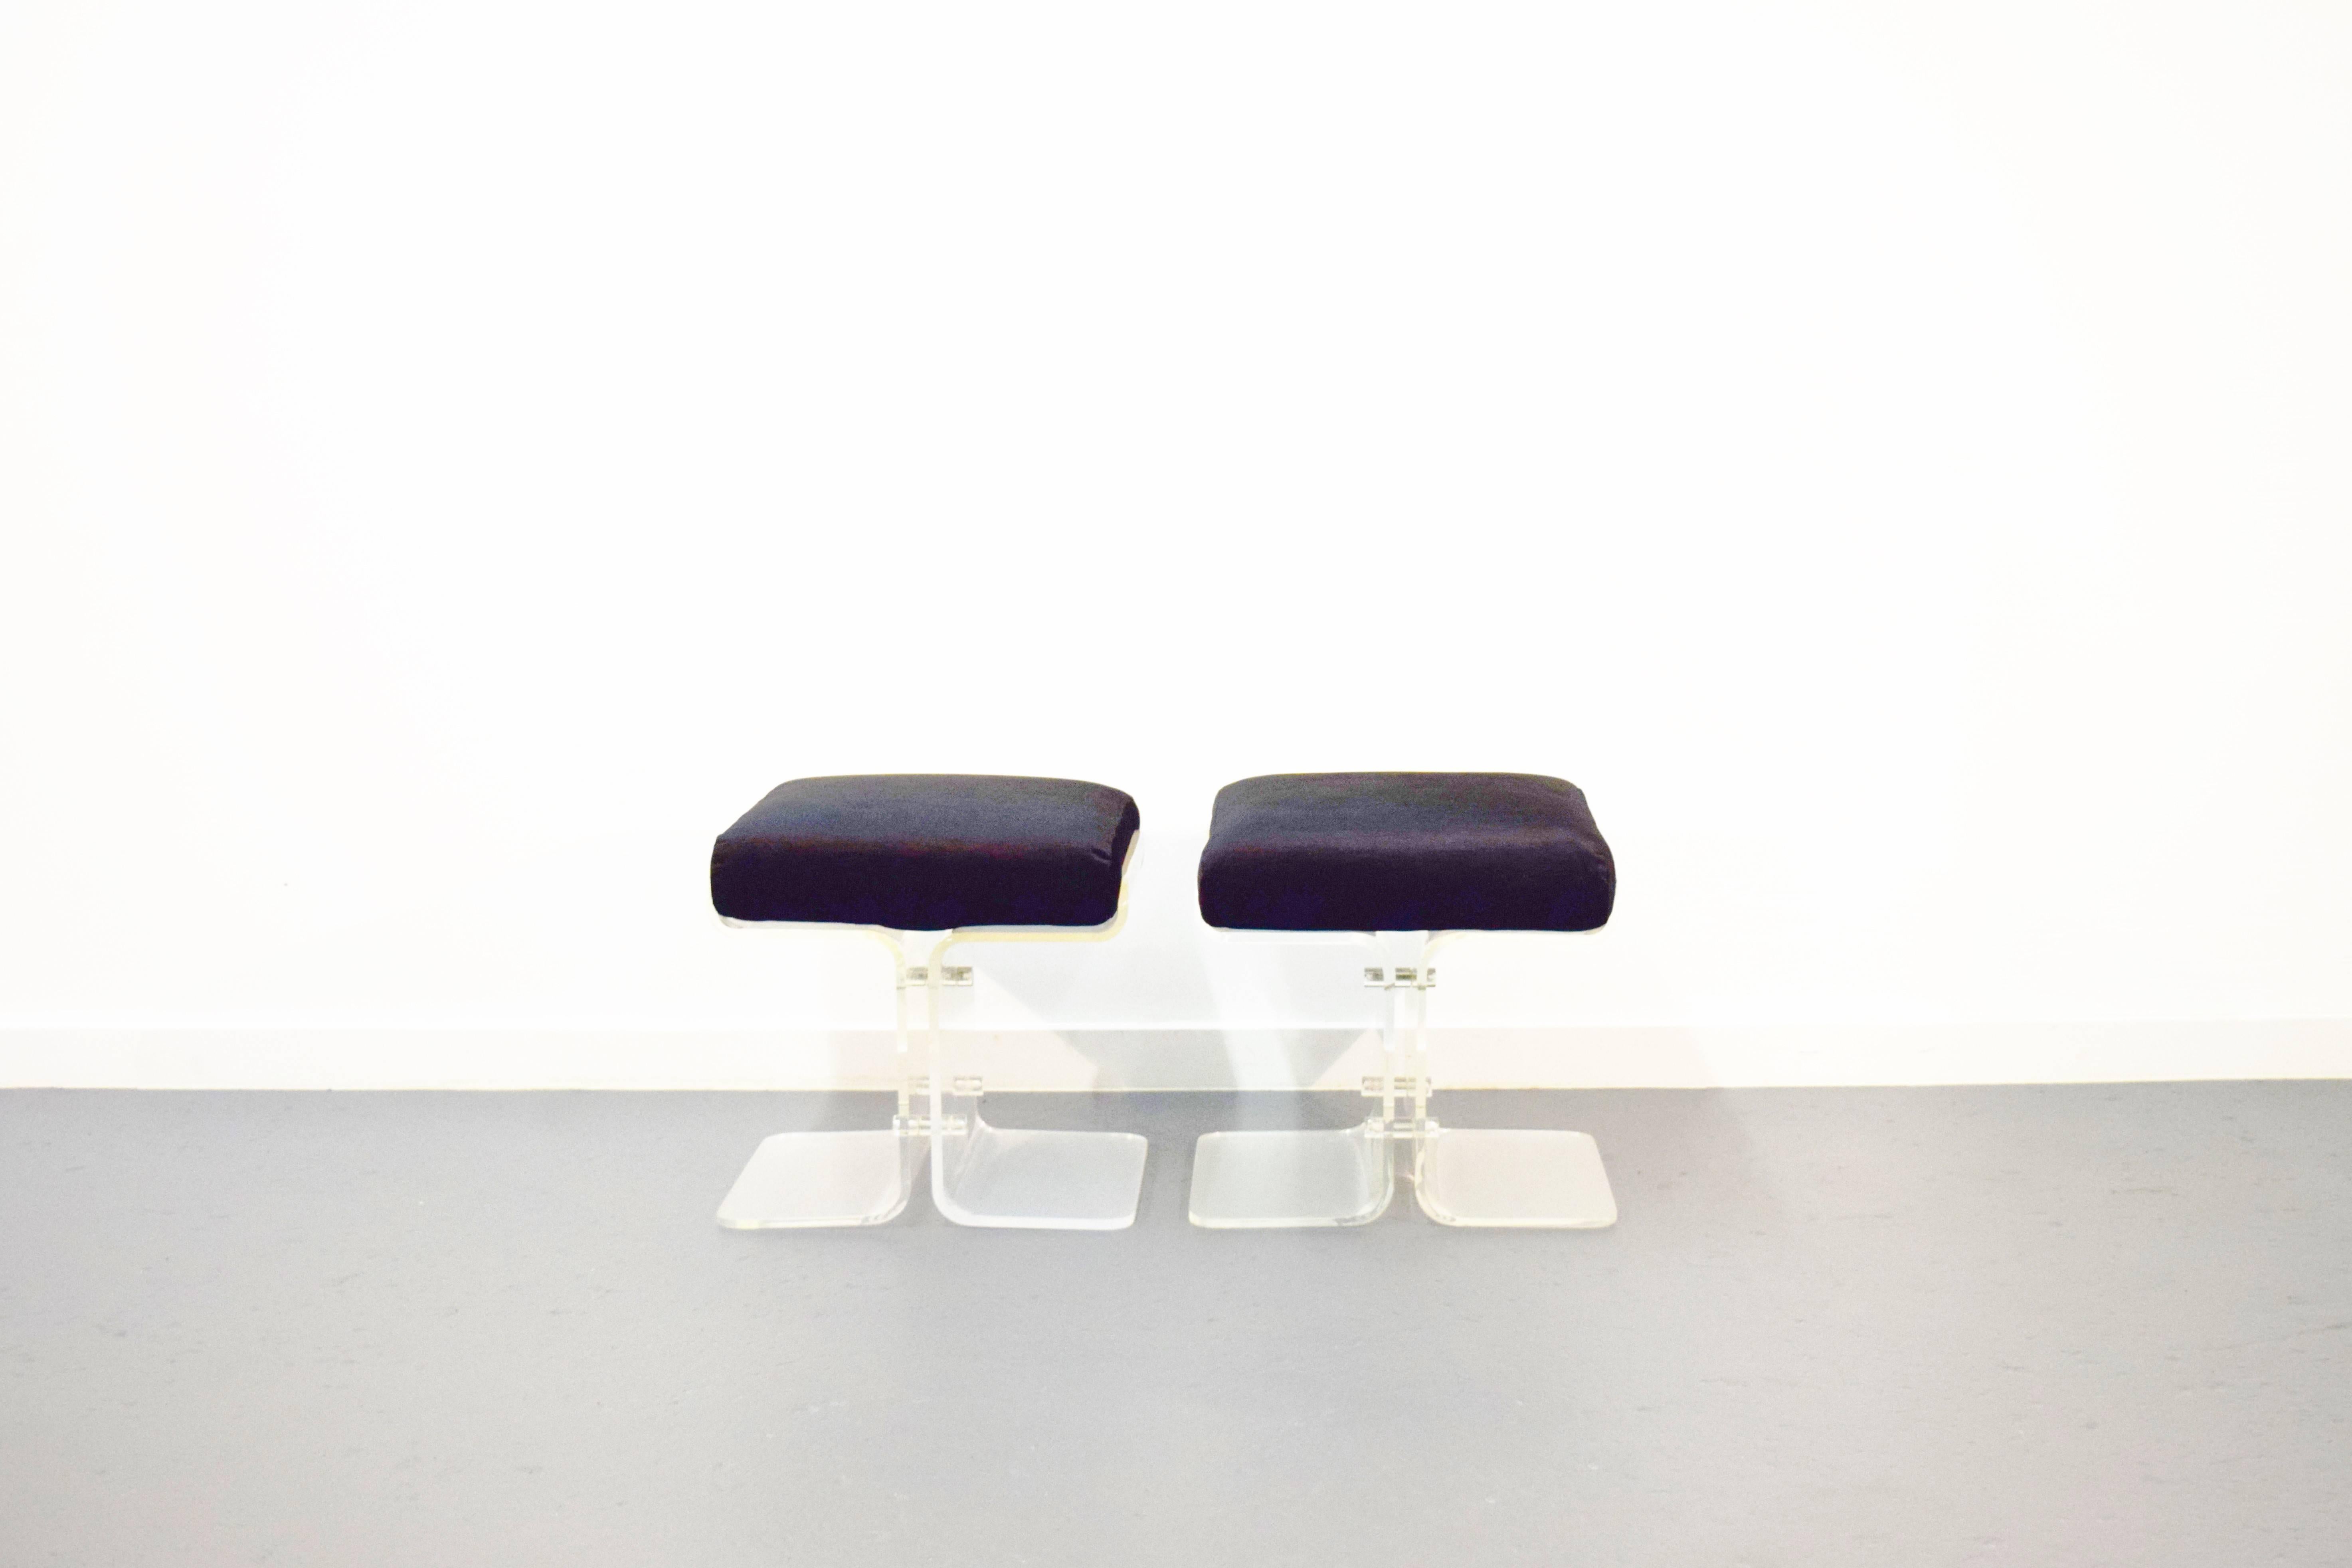 Pair of Lucite butterfly stools. Stools have been reupholstered in black soft velvet.